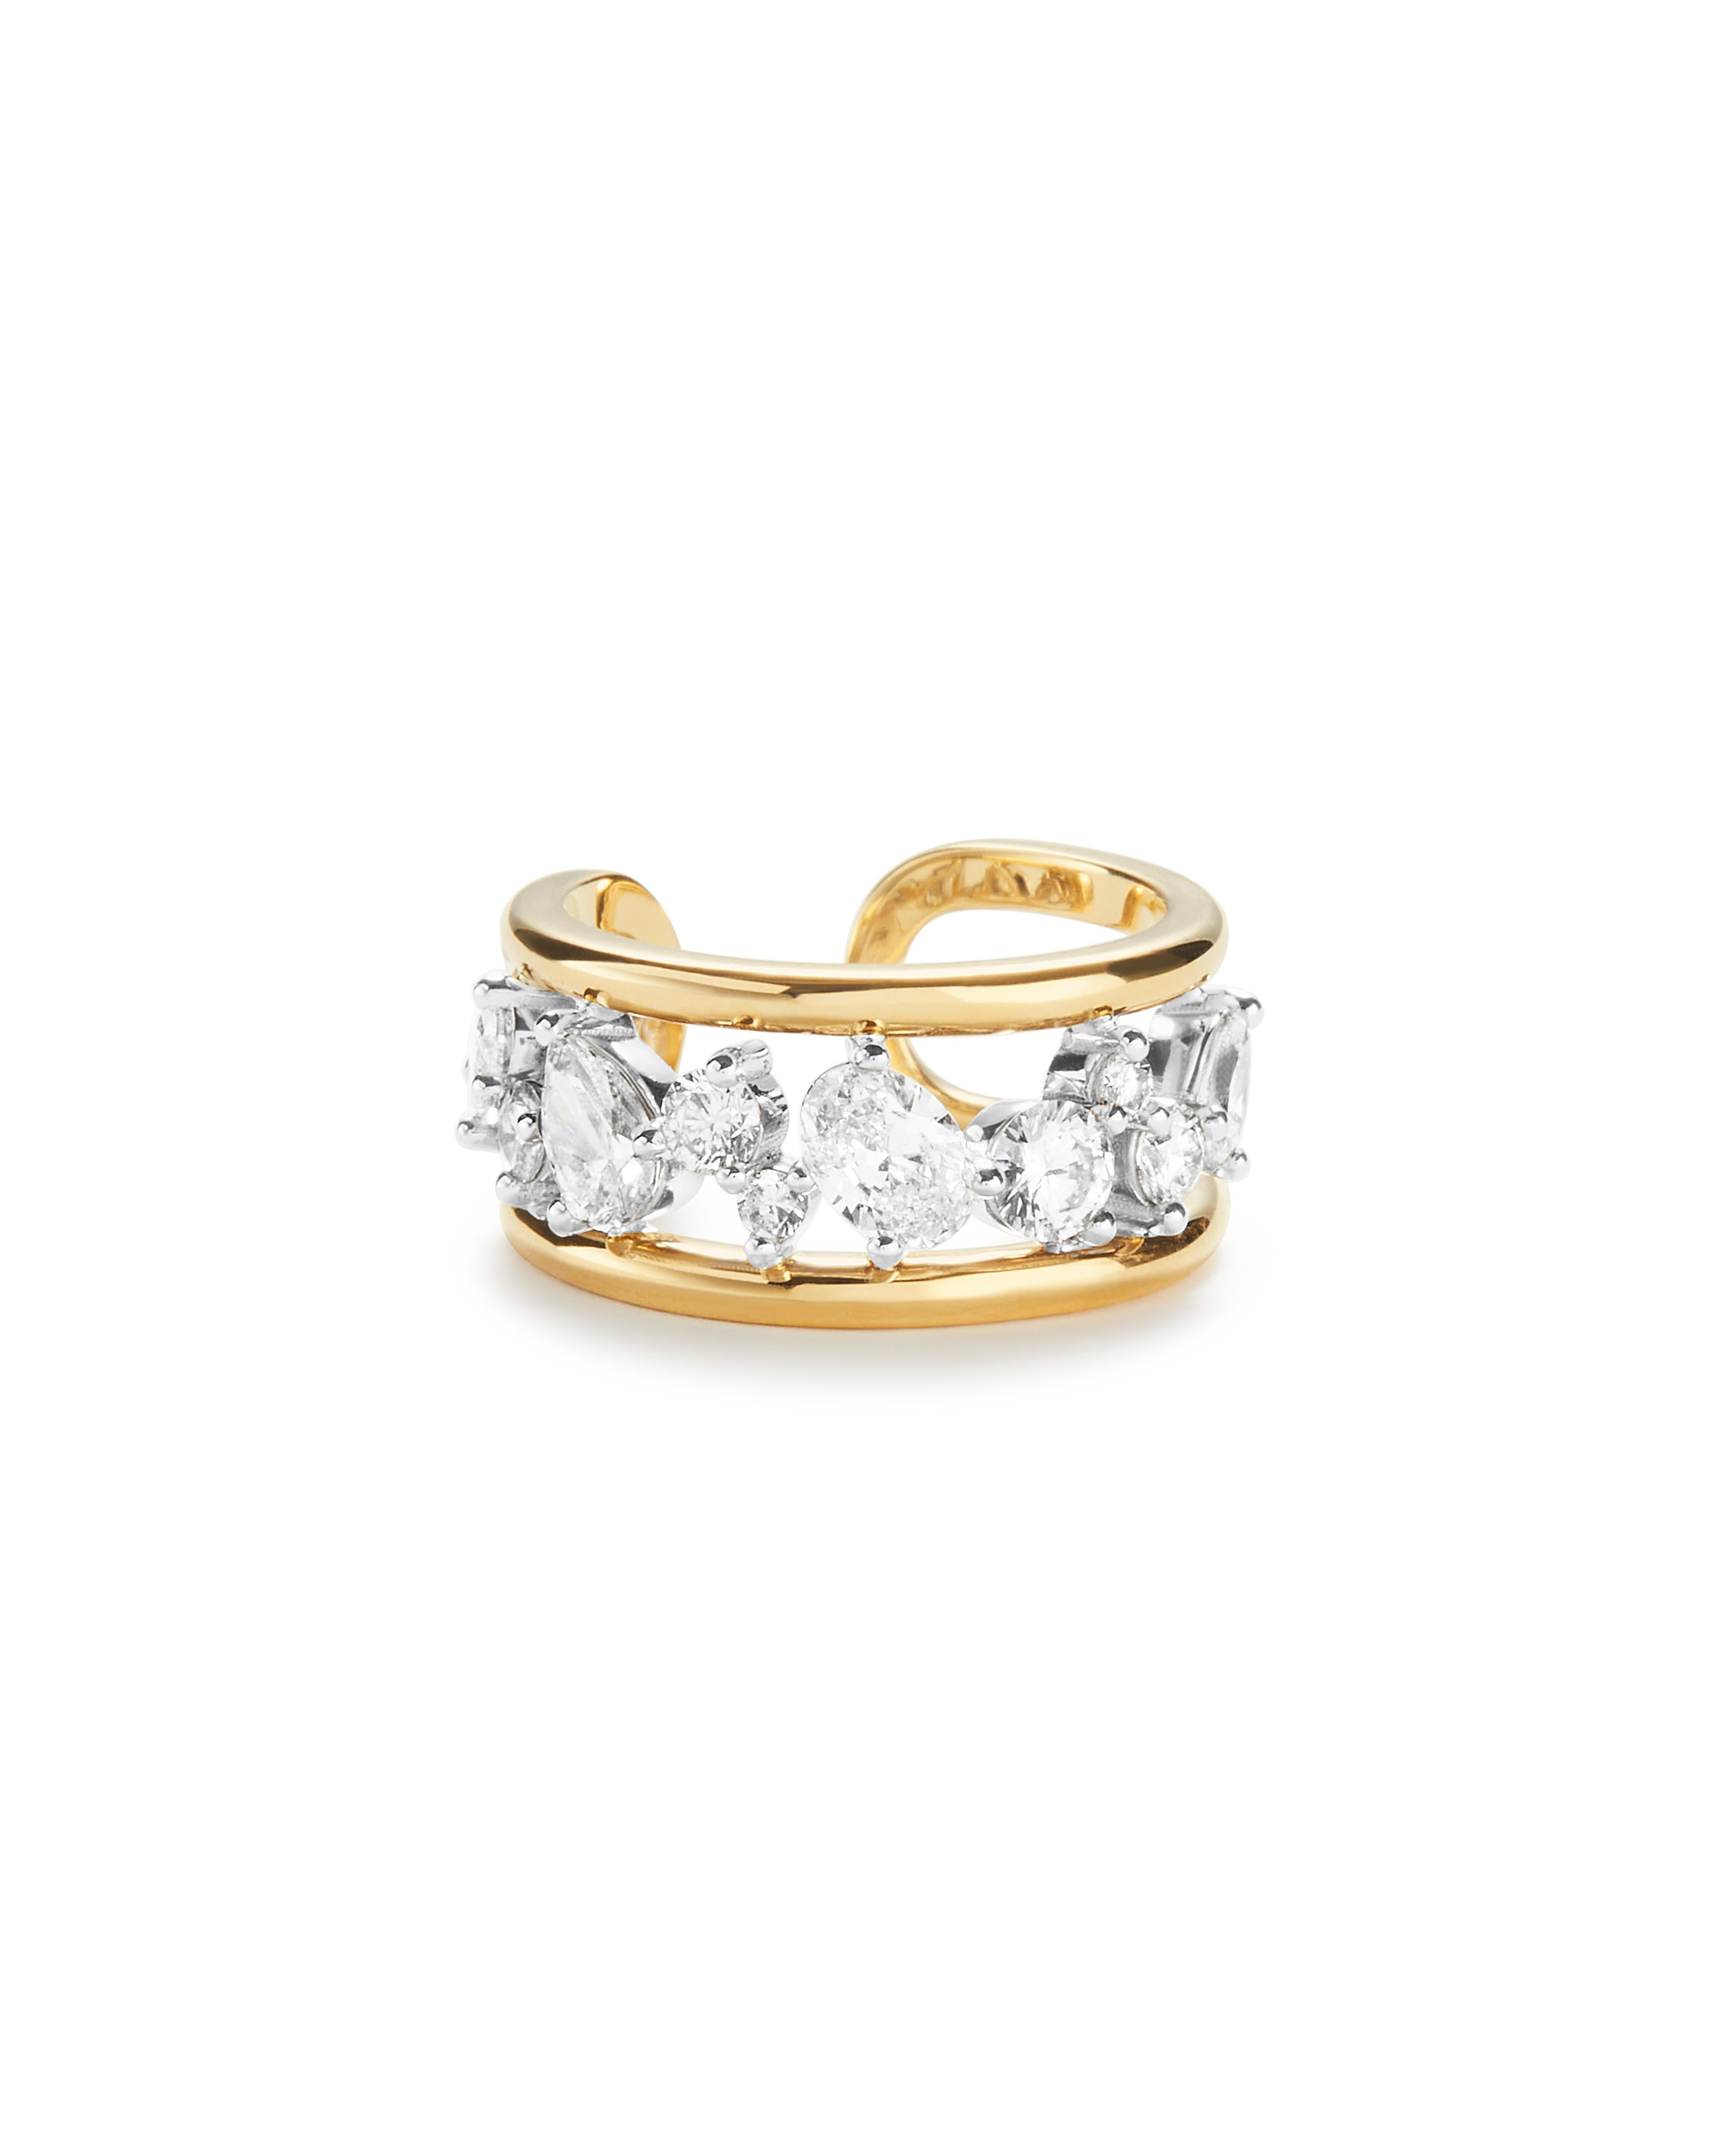 For Sale:  Rosario Navia Mara Large Link Ring in 18K Gold, Platinum, and Diamonds 2